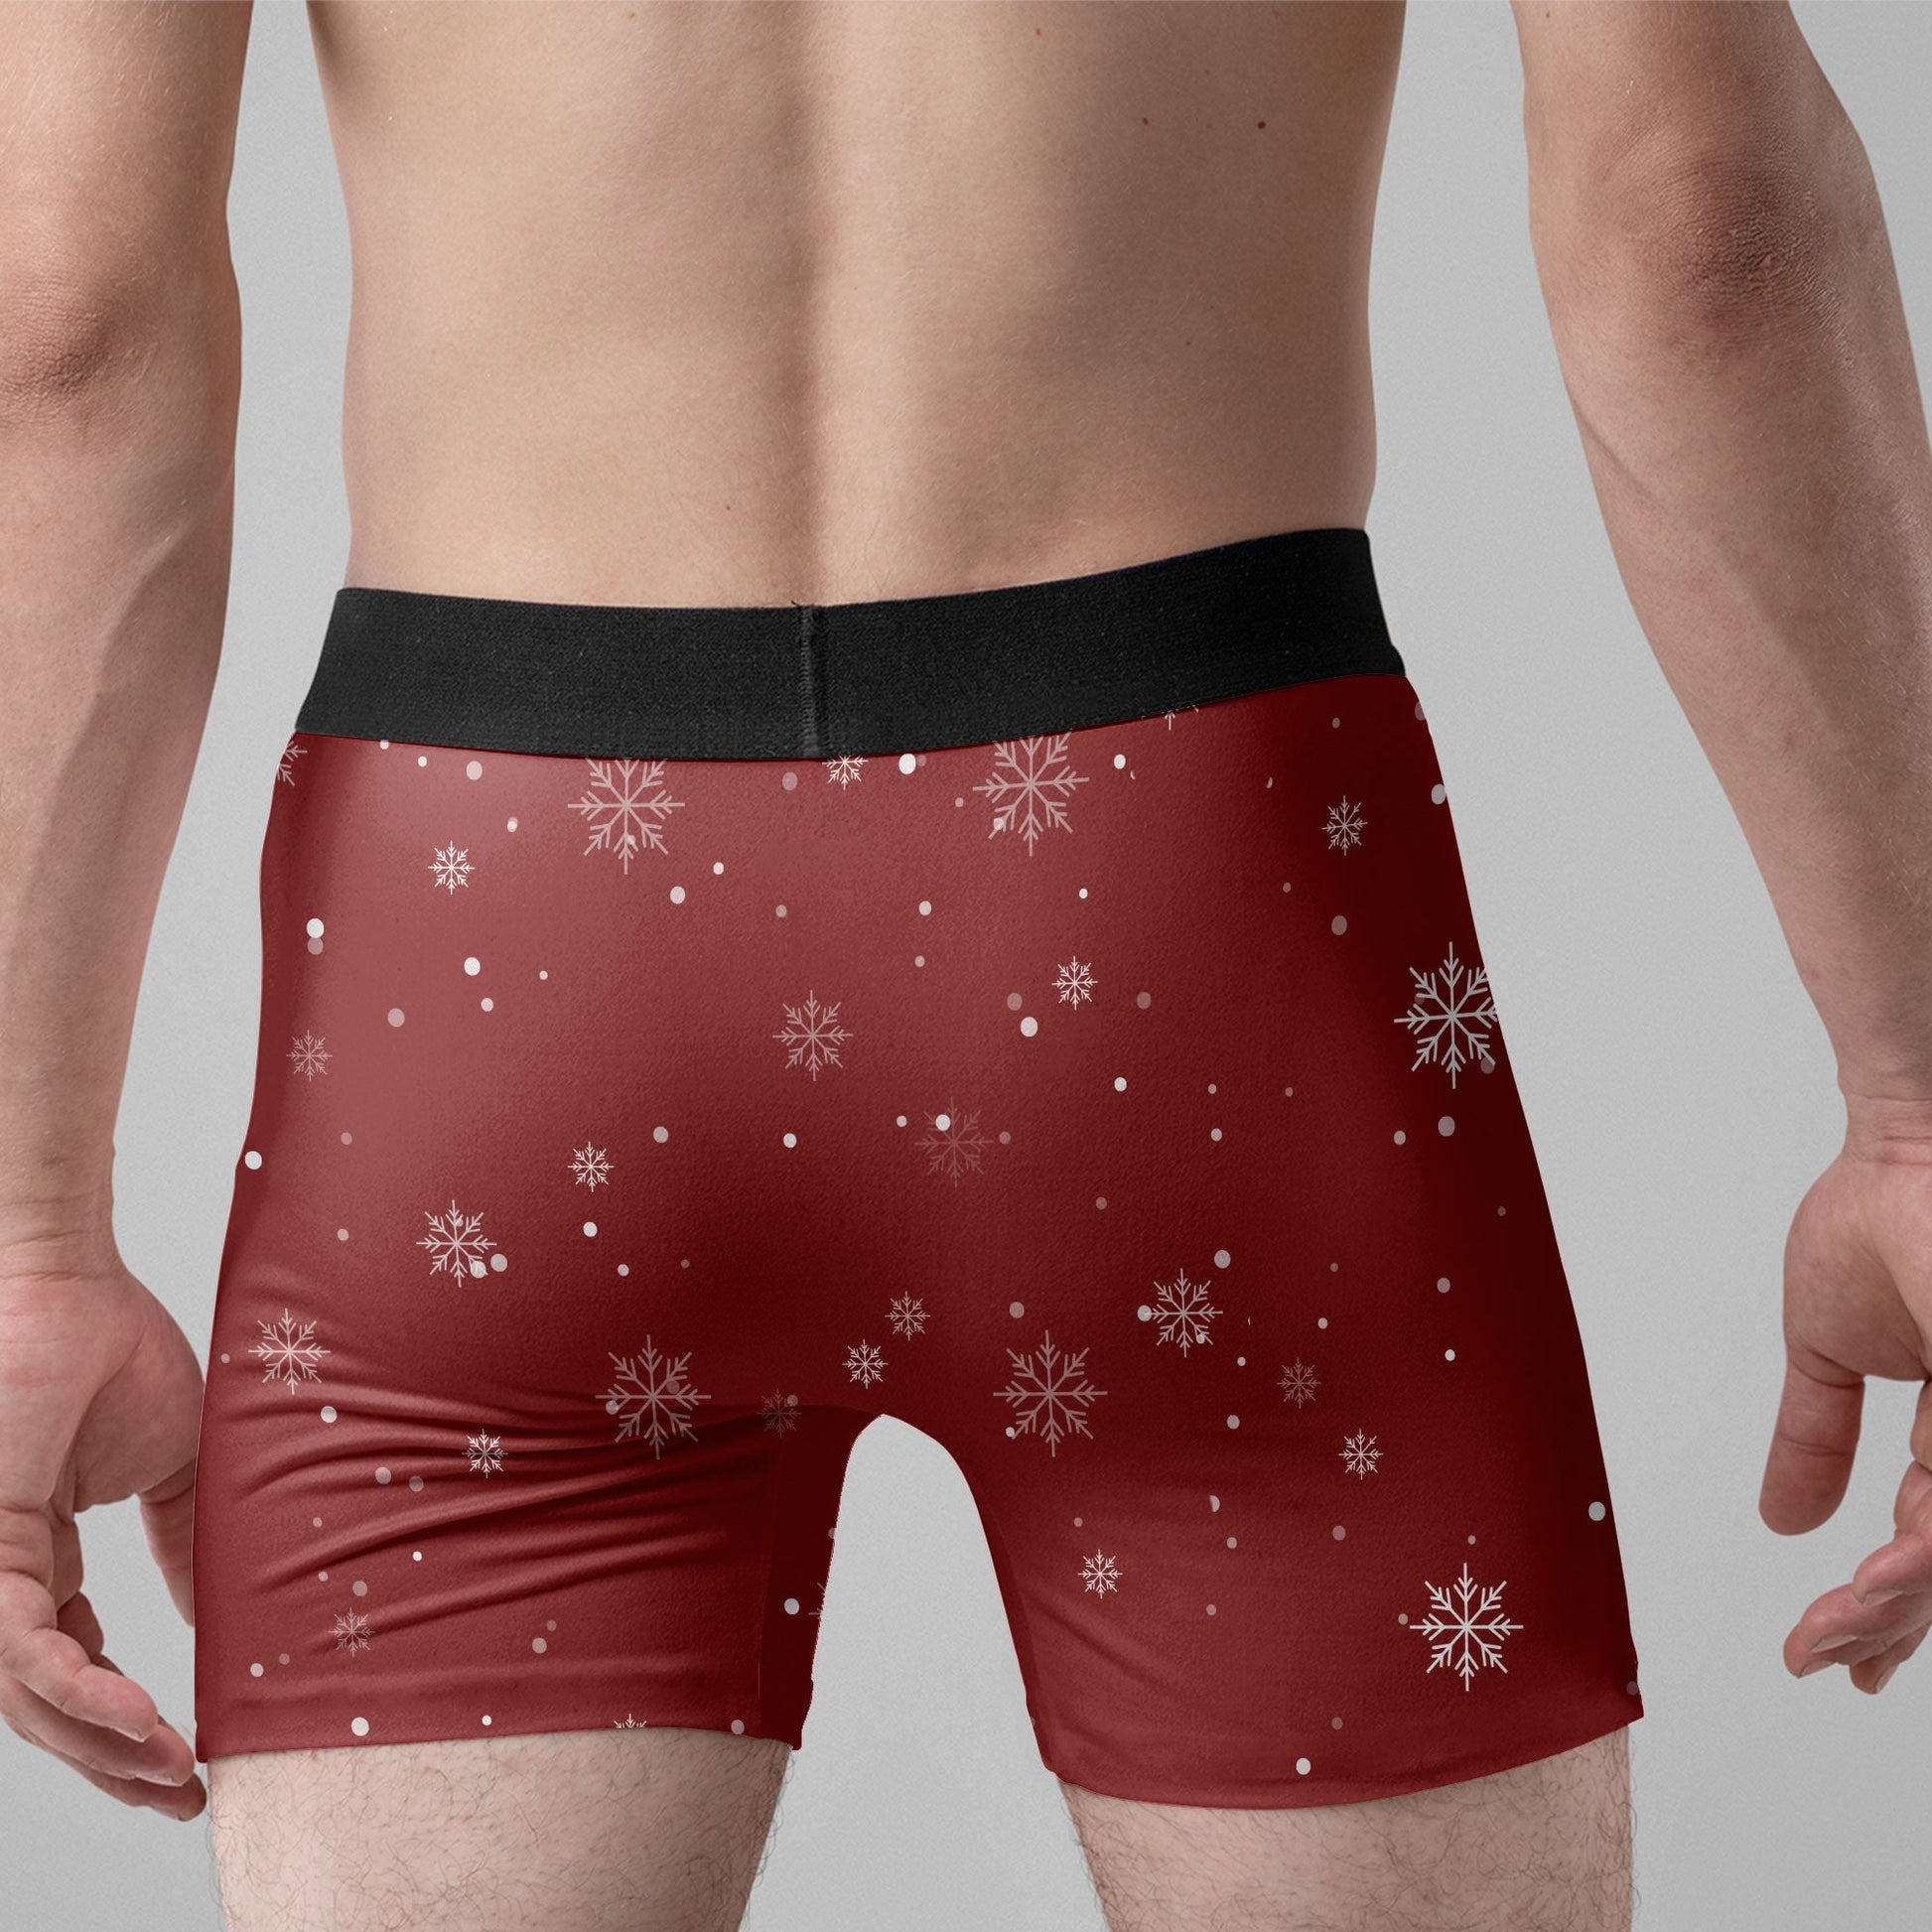 Only Her Can Jingle These Bells - Personalized Photo Men's Boxer Brief –  Macorner